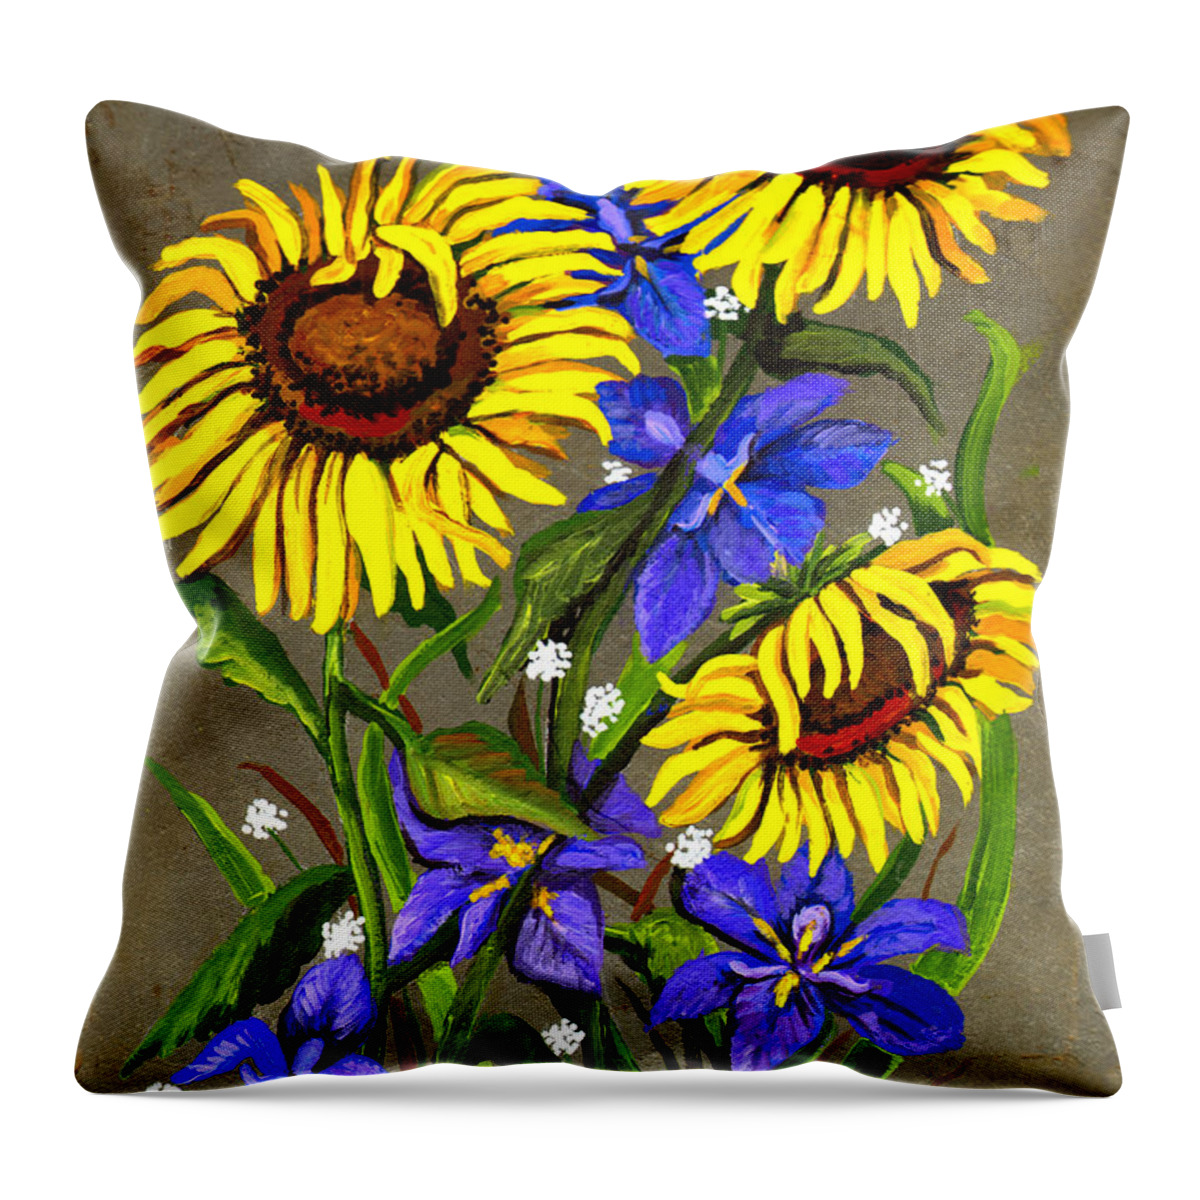 Flowers Throw Pillow featuring the painting Bloom by Elaine Hodges